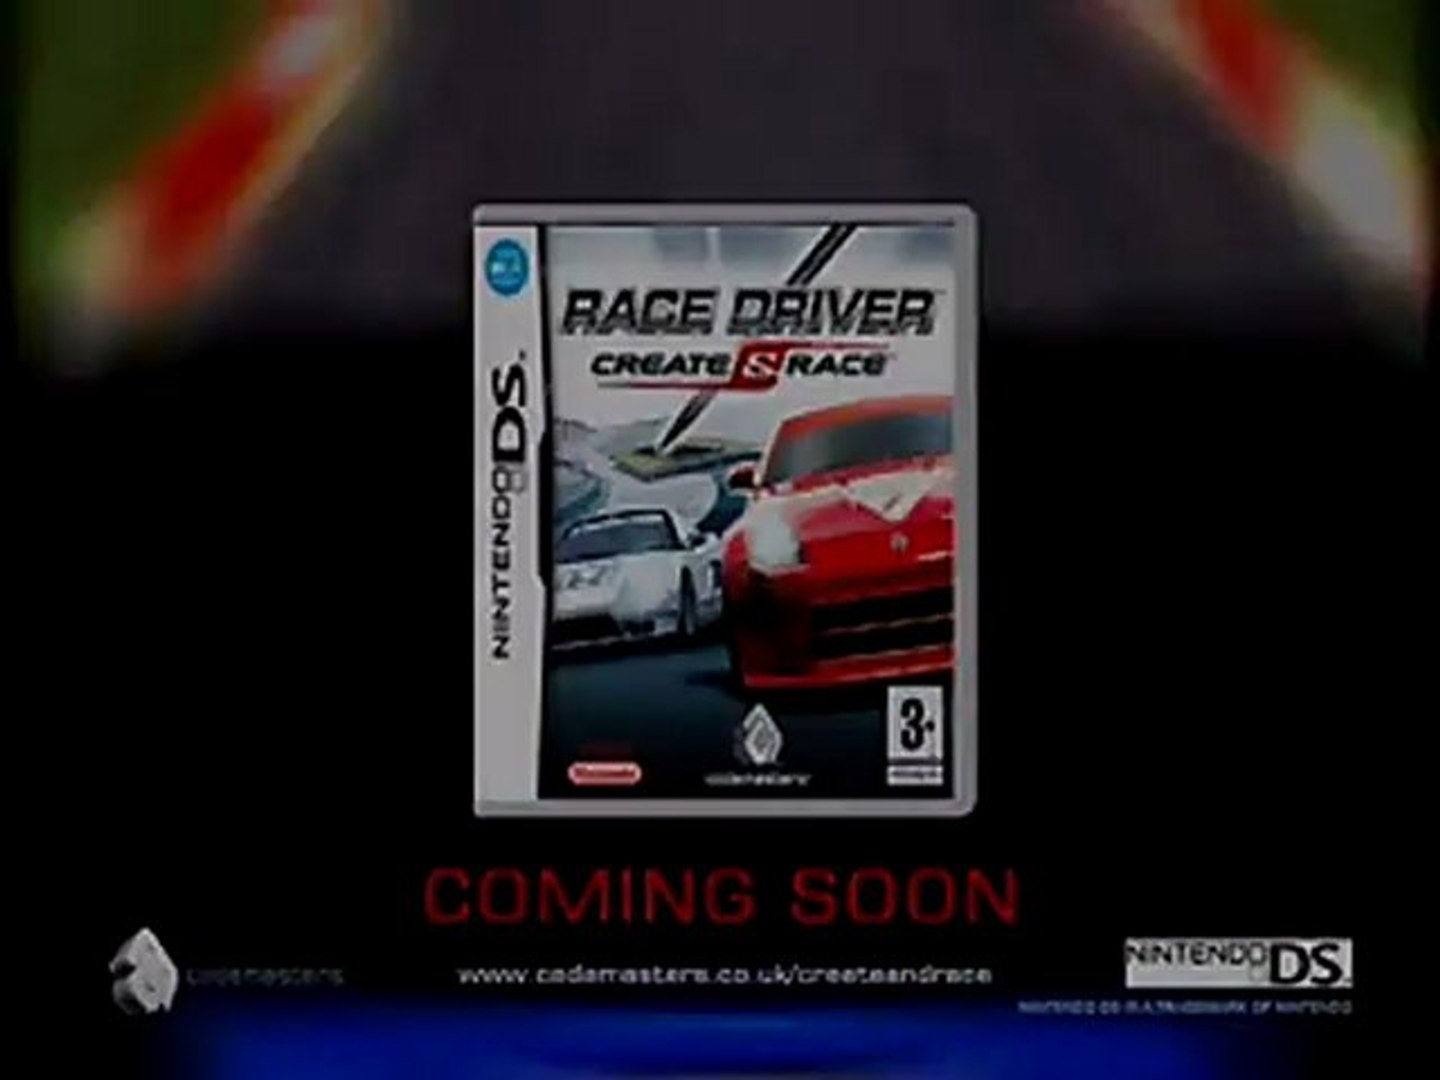 ⁣Race Driver create and race - Tralier 1